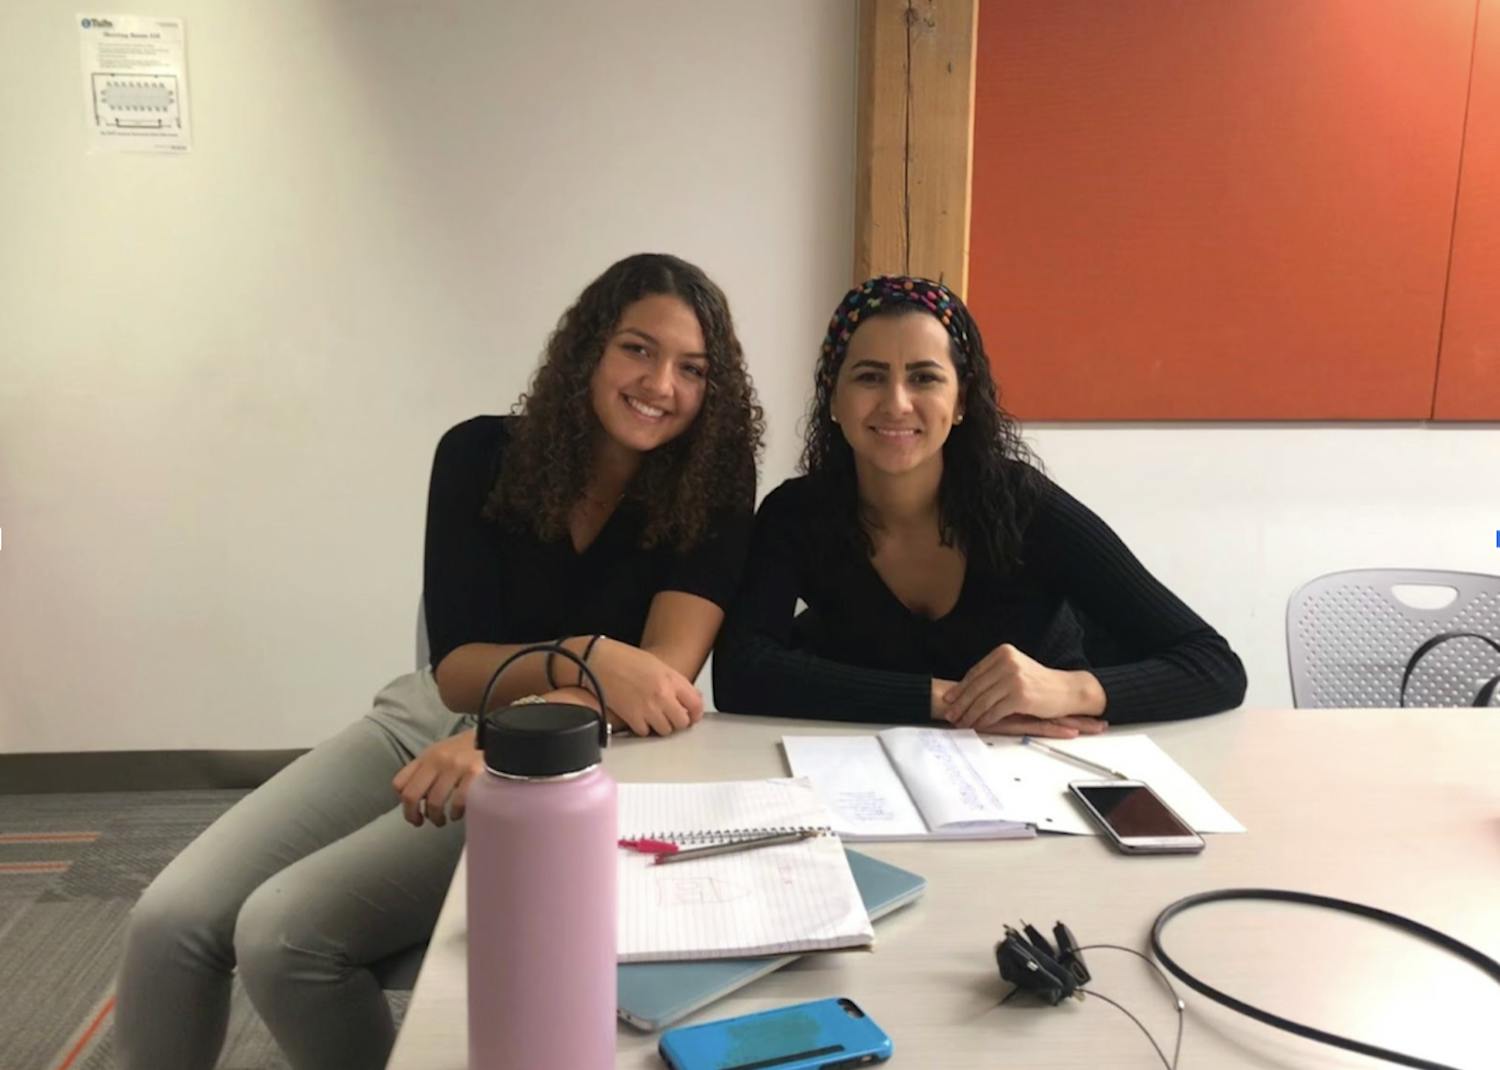 Elise Webster, a Tufts student who graduated in 2022, is seated next to her Portuguese-speaking learner Regiane at Potencia.